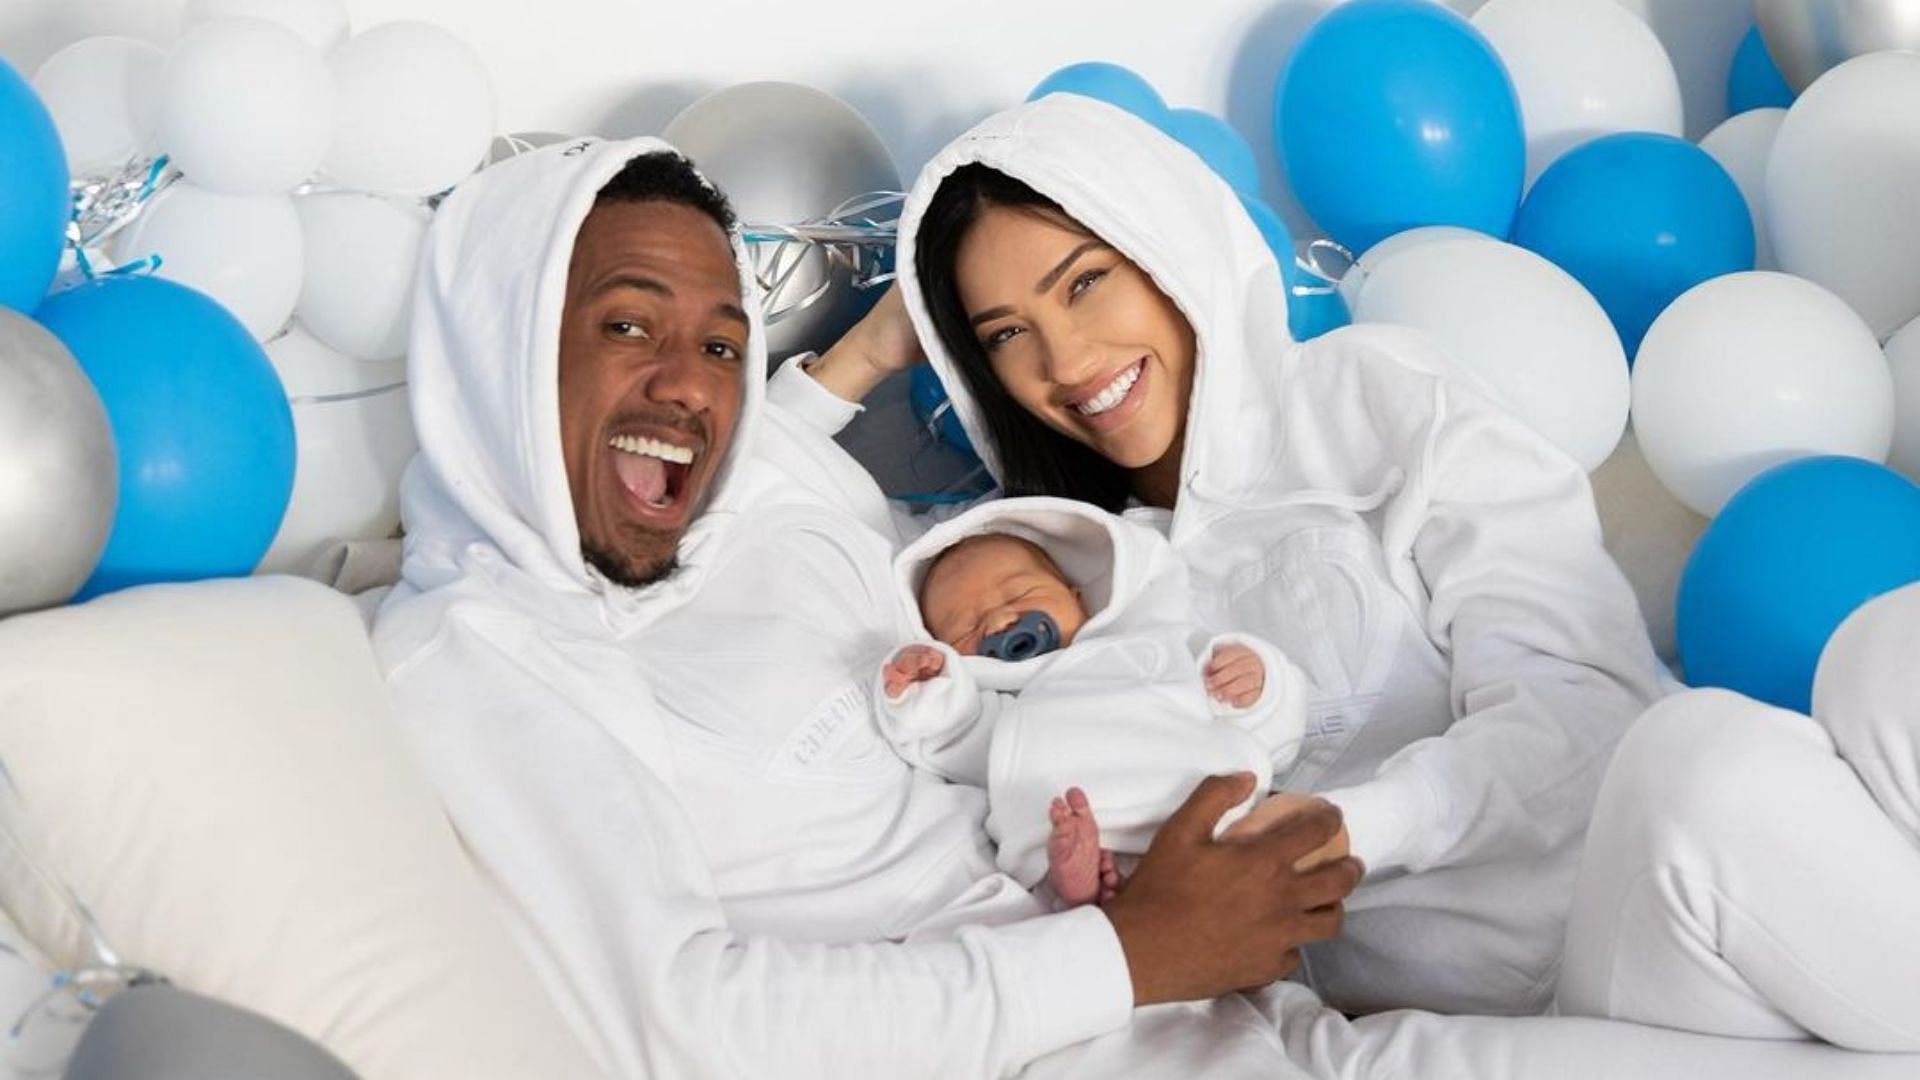 Selling Sunset Season 6 Bre Tiesi welcomed her first child with Nick Cannon (Image via bre_tiesi/Instagram)